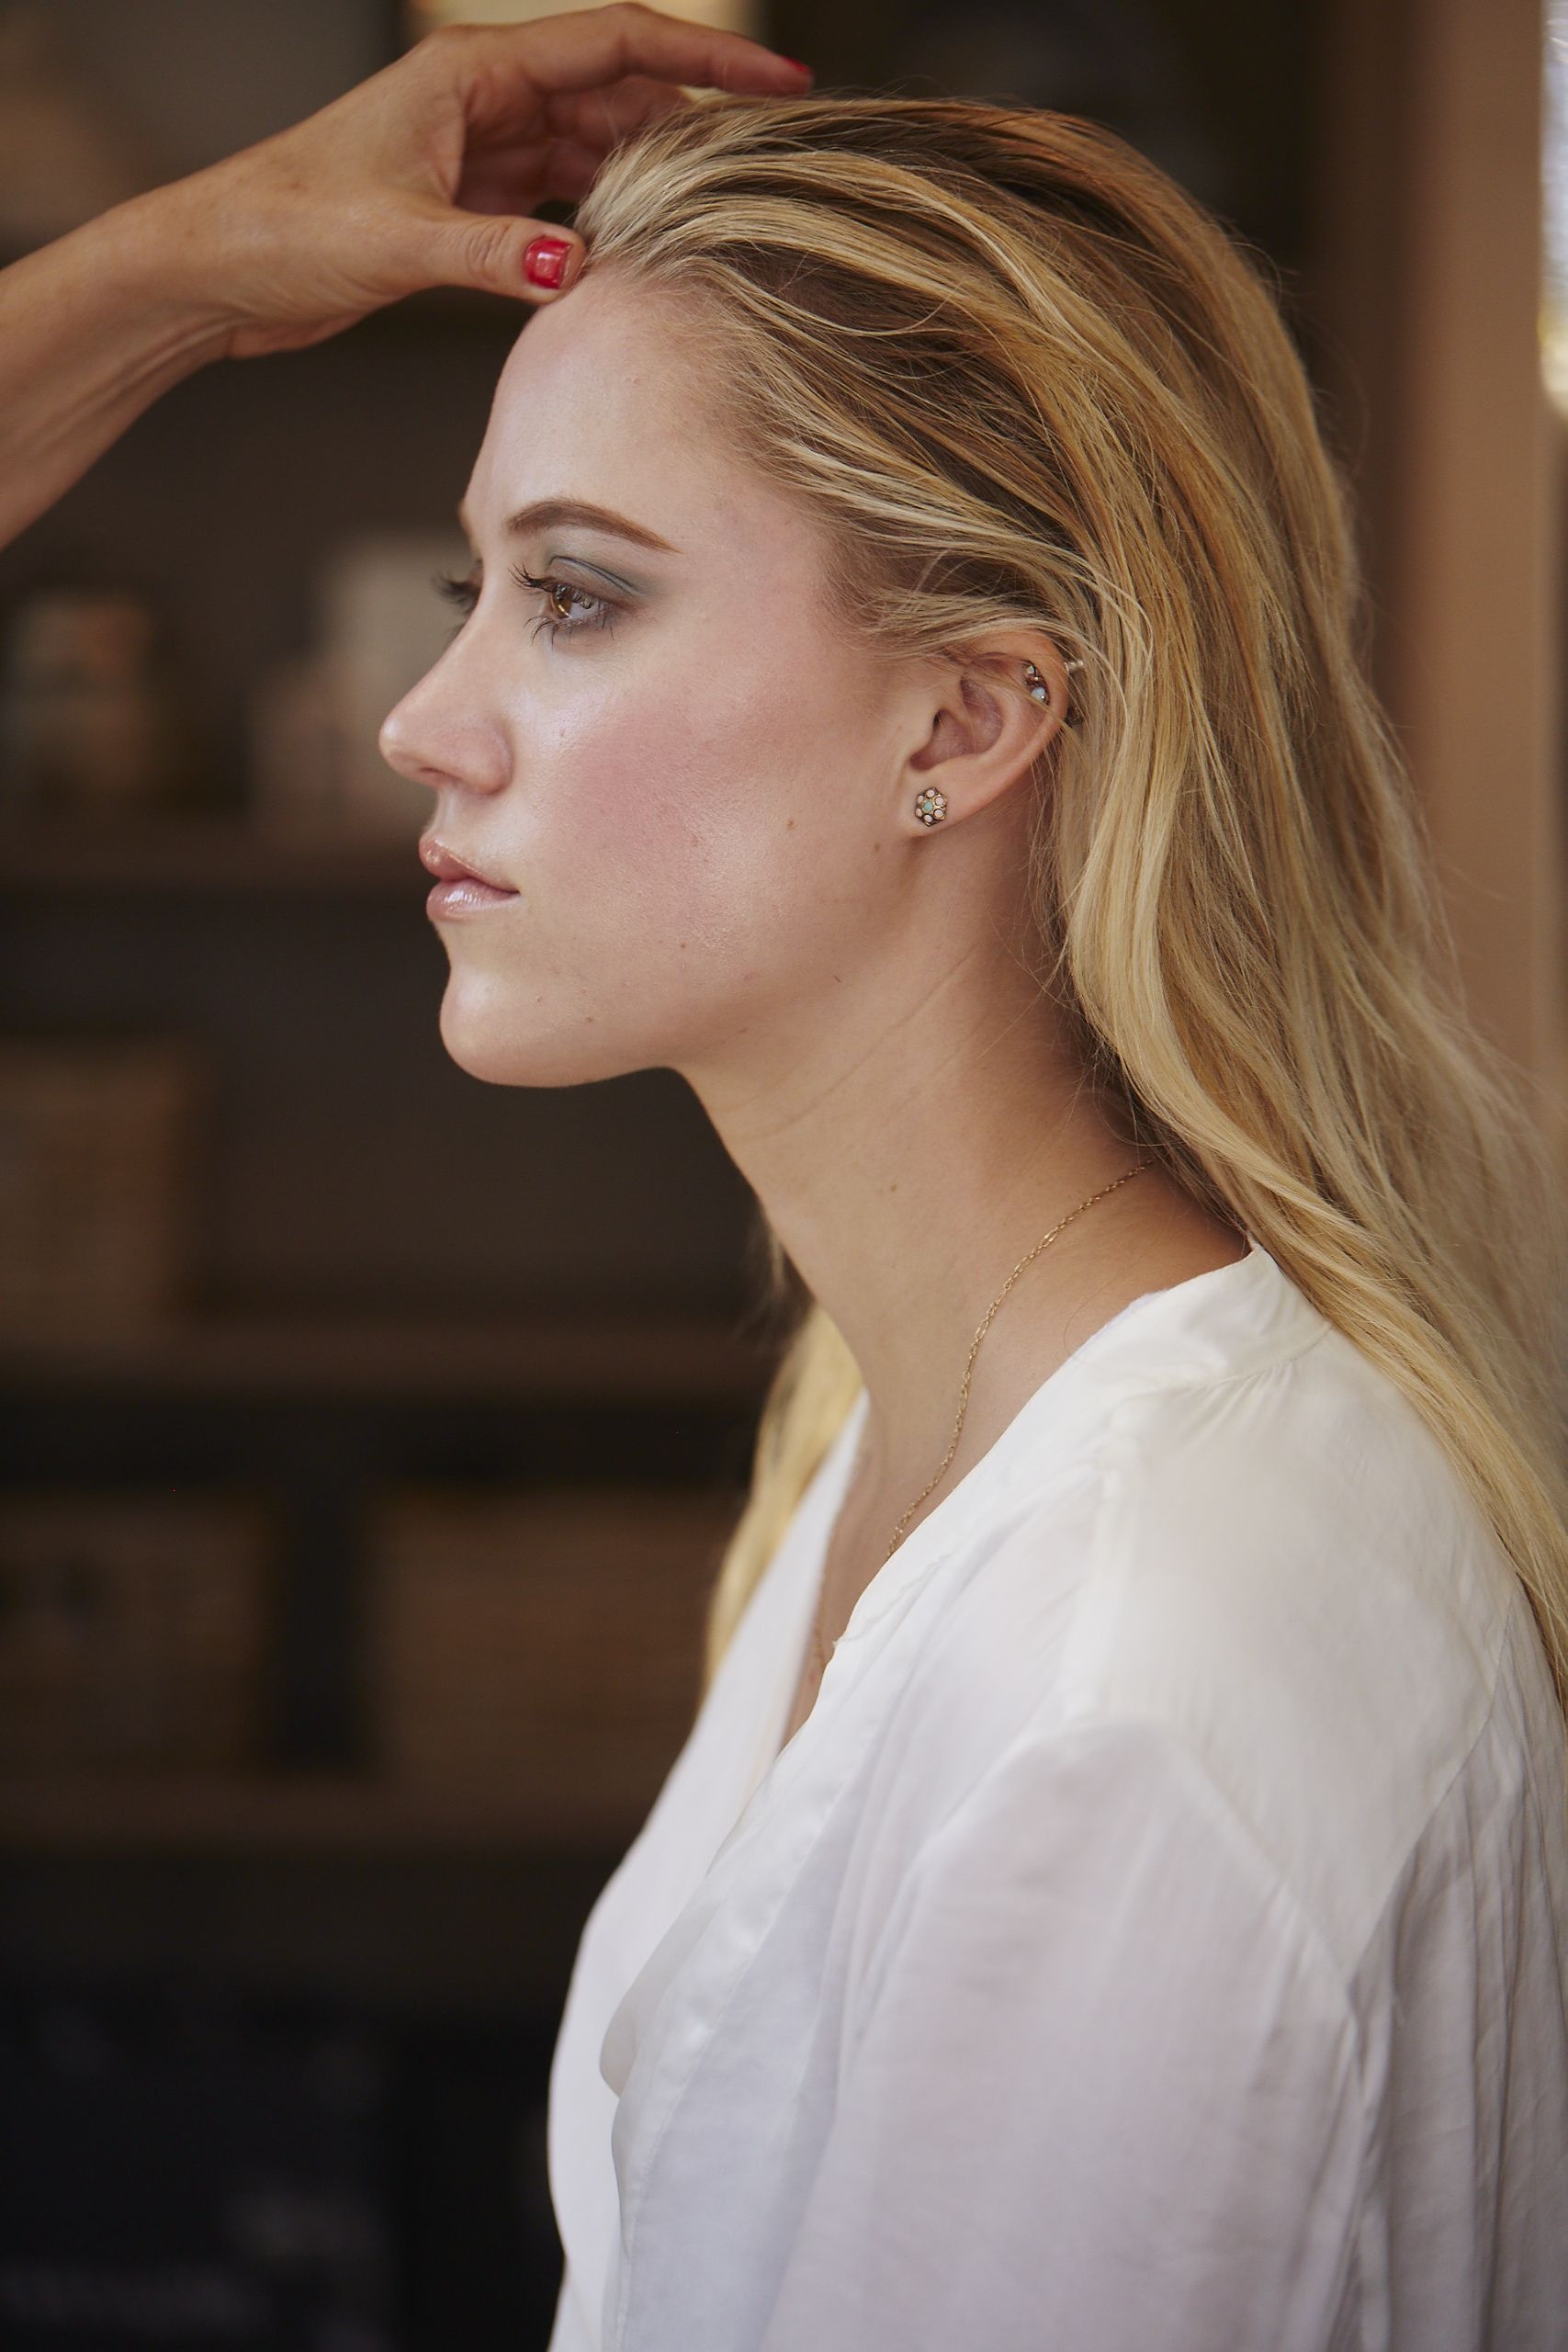 Maika Monroe: Preparation For Filming, Exhausting Hours-Long Make-Up Process. 1710x2560 HD Background.